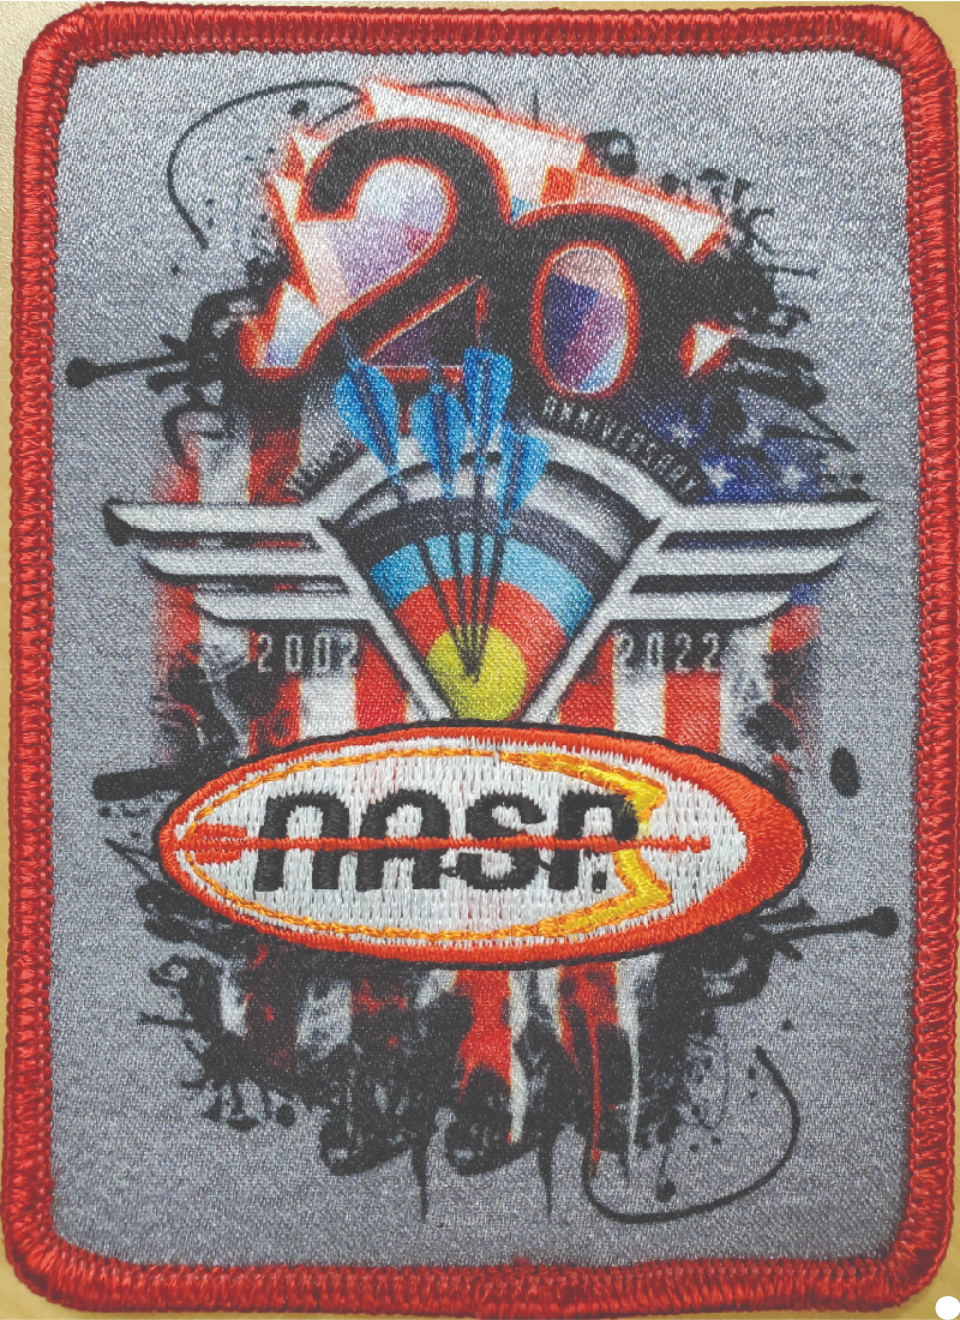 NASP® National Patch